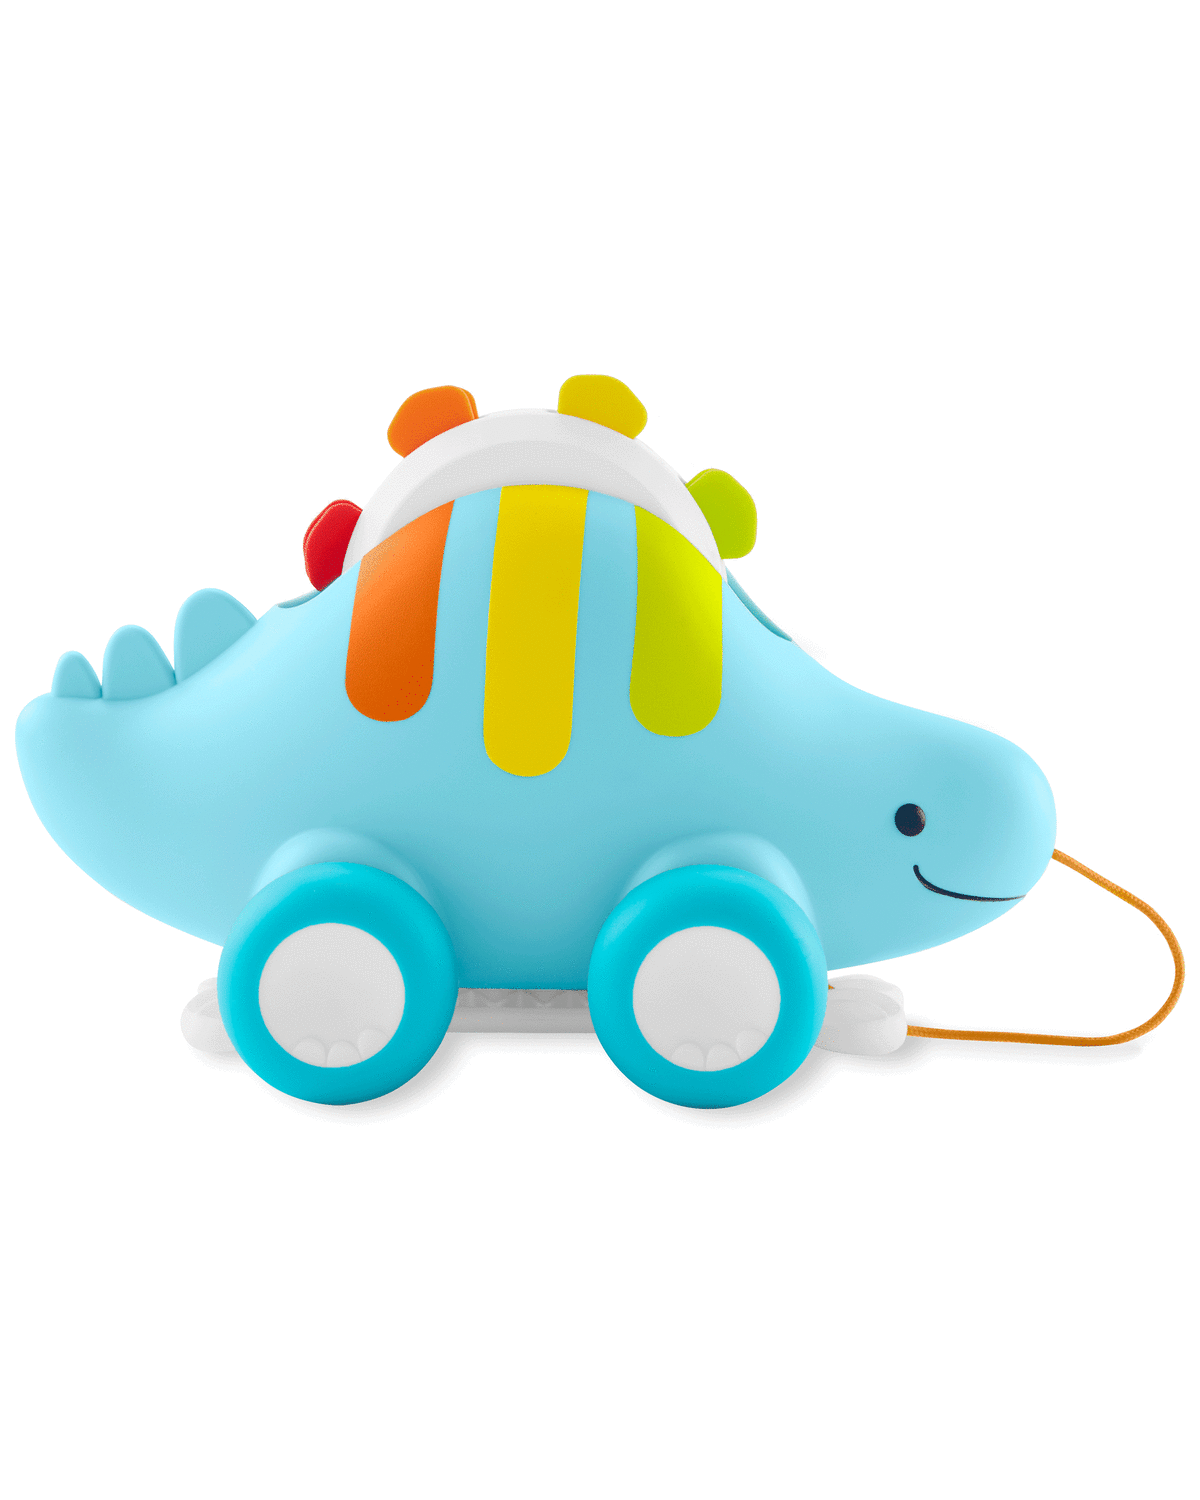 Baby Explore & More Dinosaur 3-in-1 Baby Musical Pull Toy